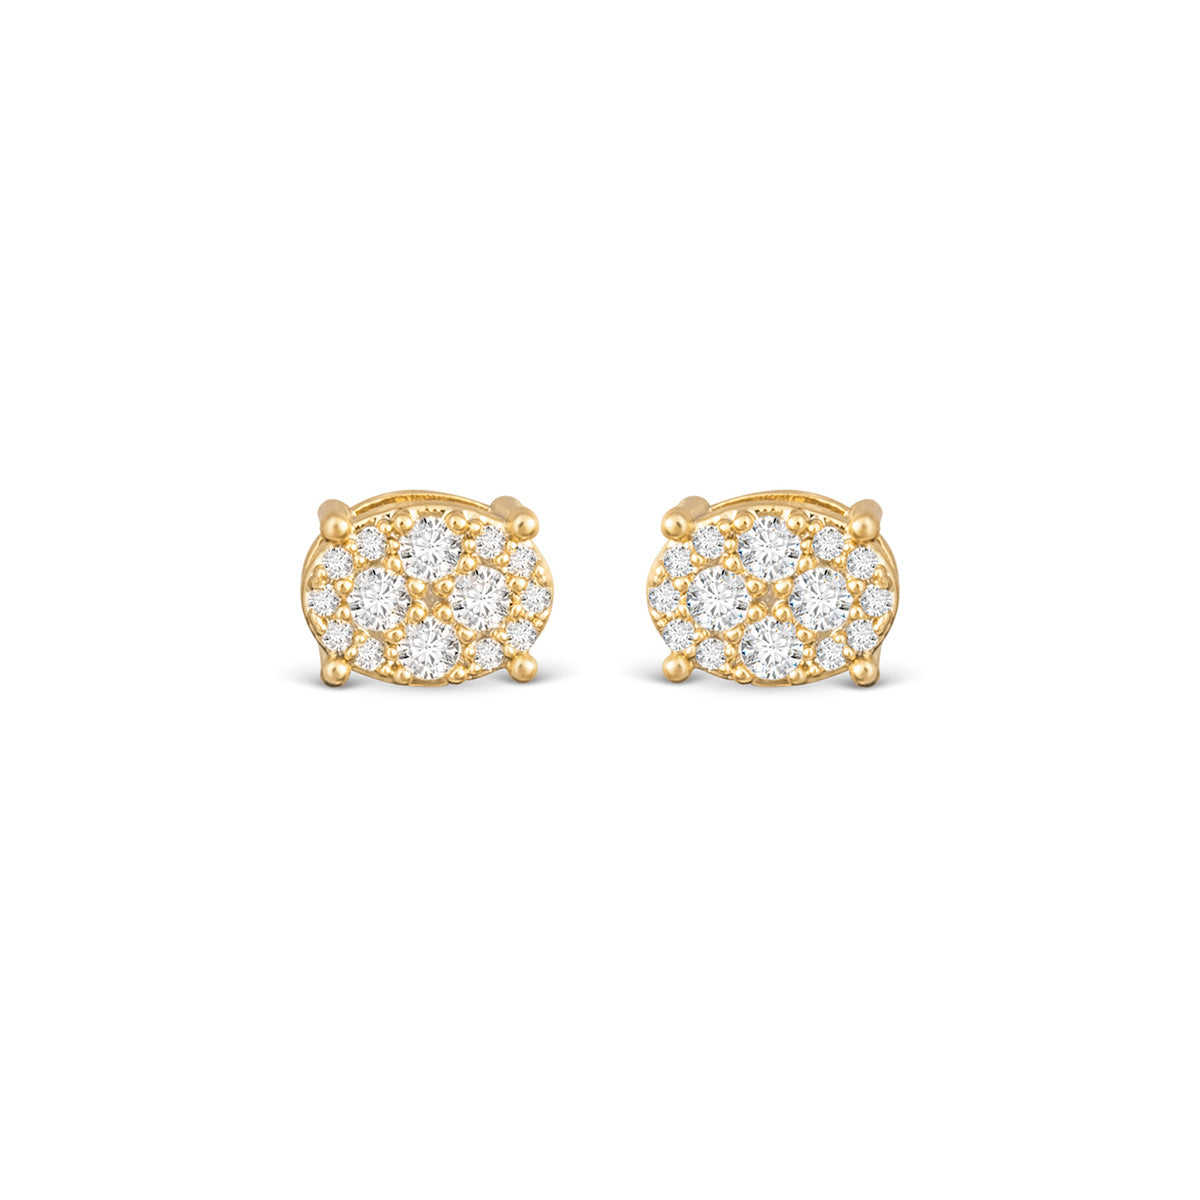 Pave Oval Stud Earrings - Gold